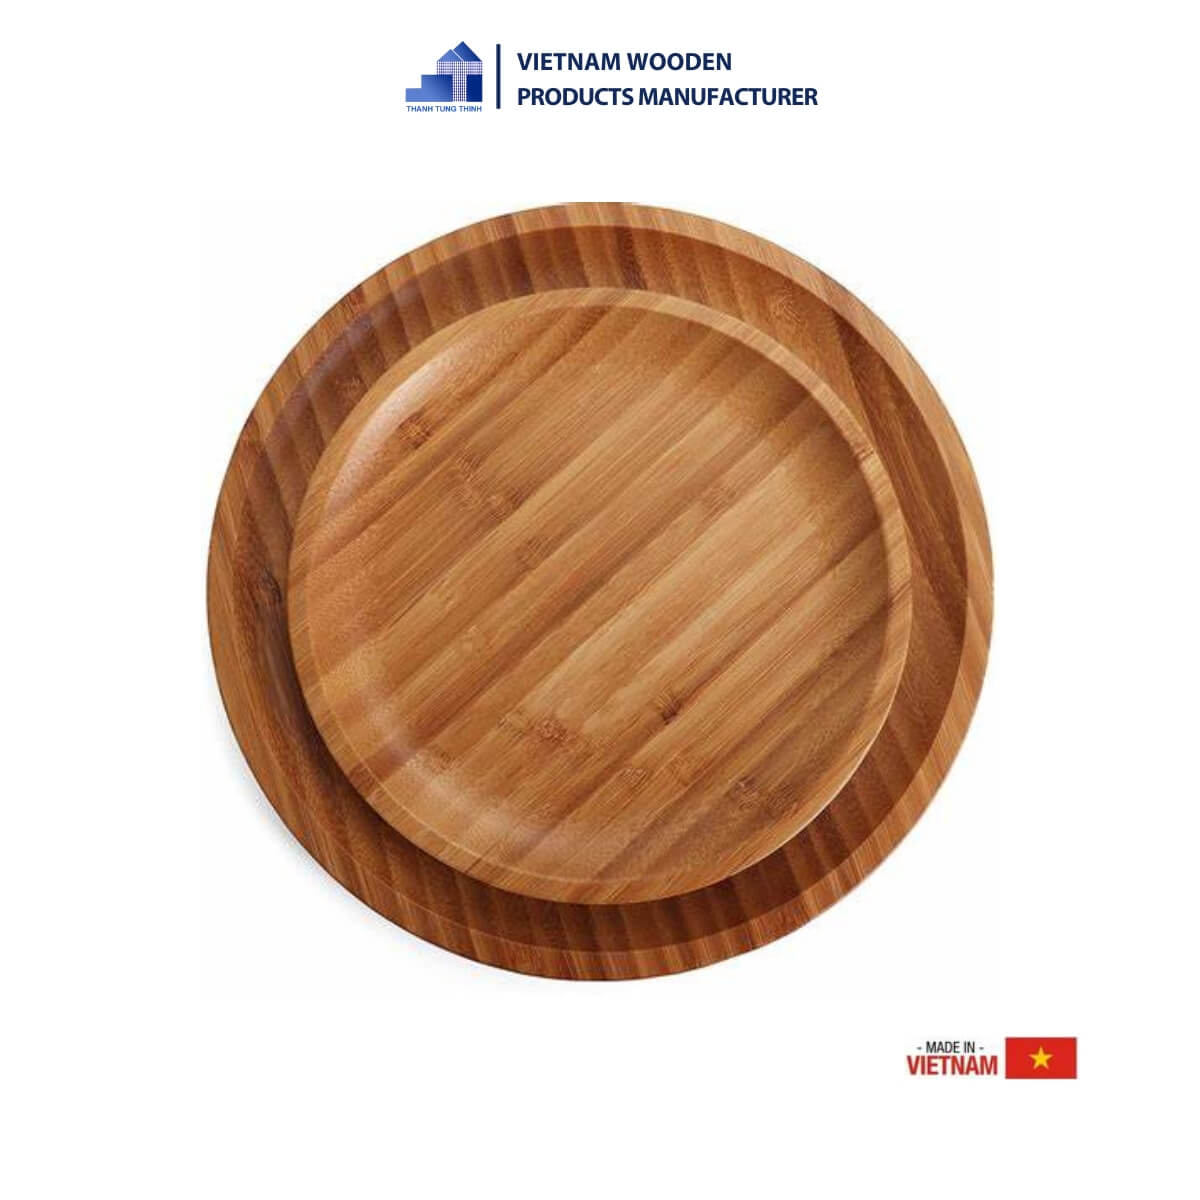 A pair of premium wooden plates that are safe for young children.